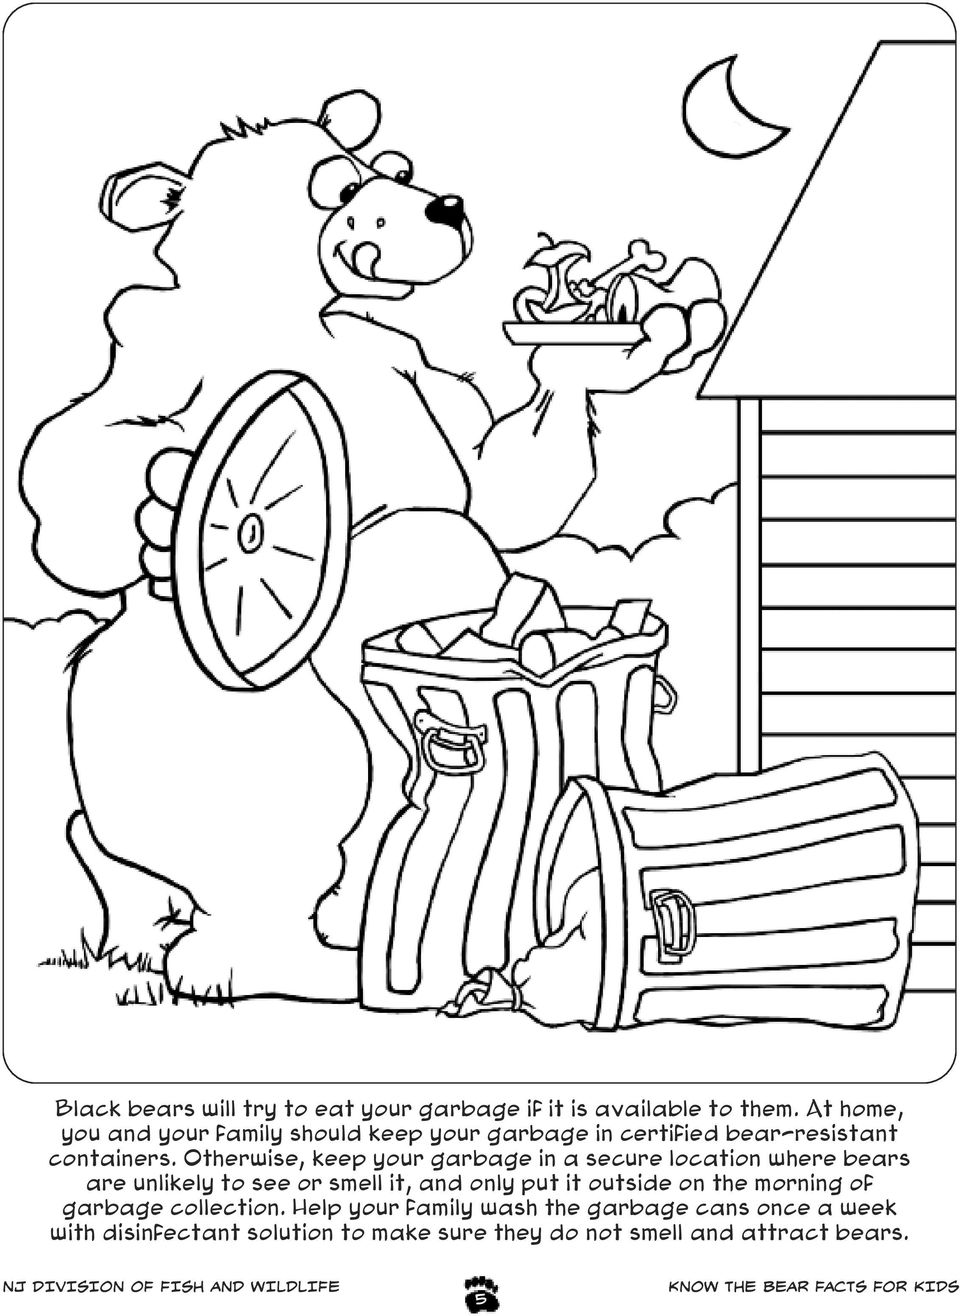 Otherwise, keep your garbage in a secure location where bears are unlikely to see or smell it, and only put it